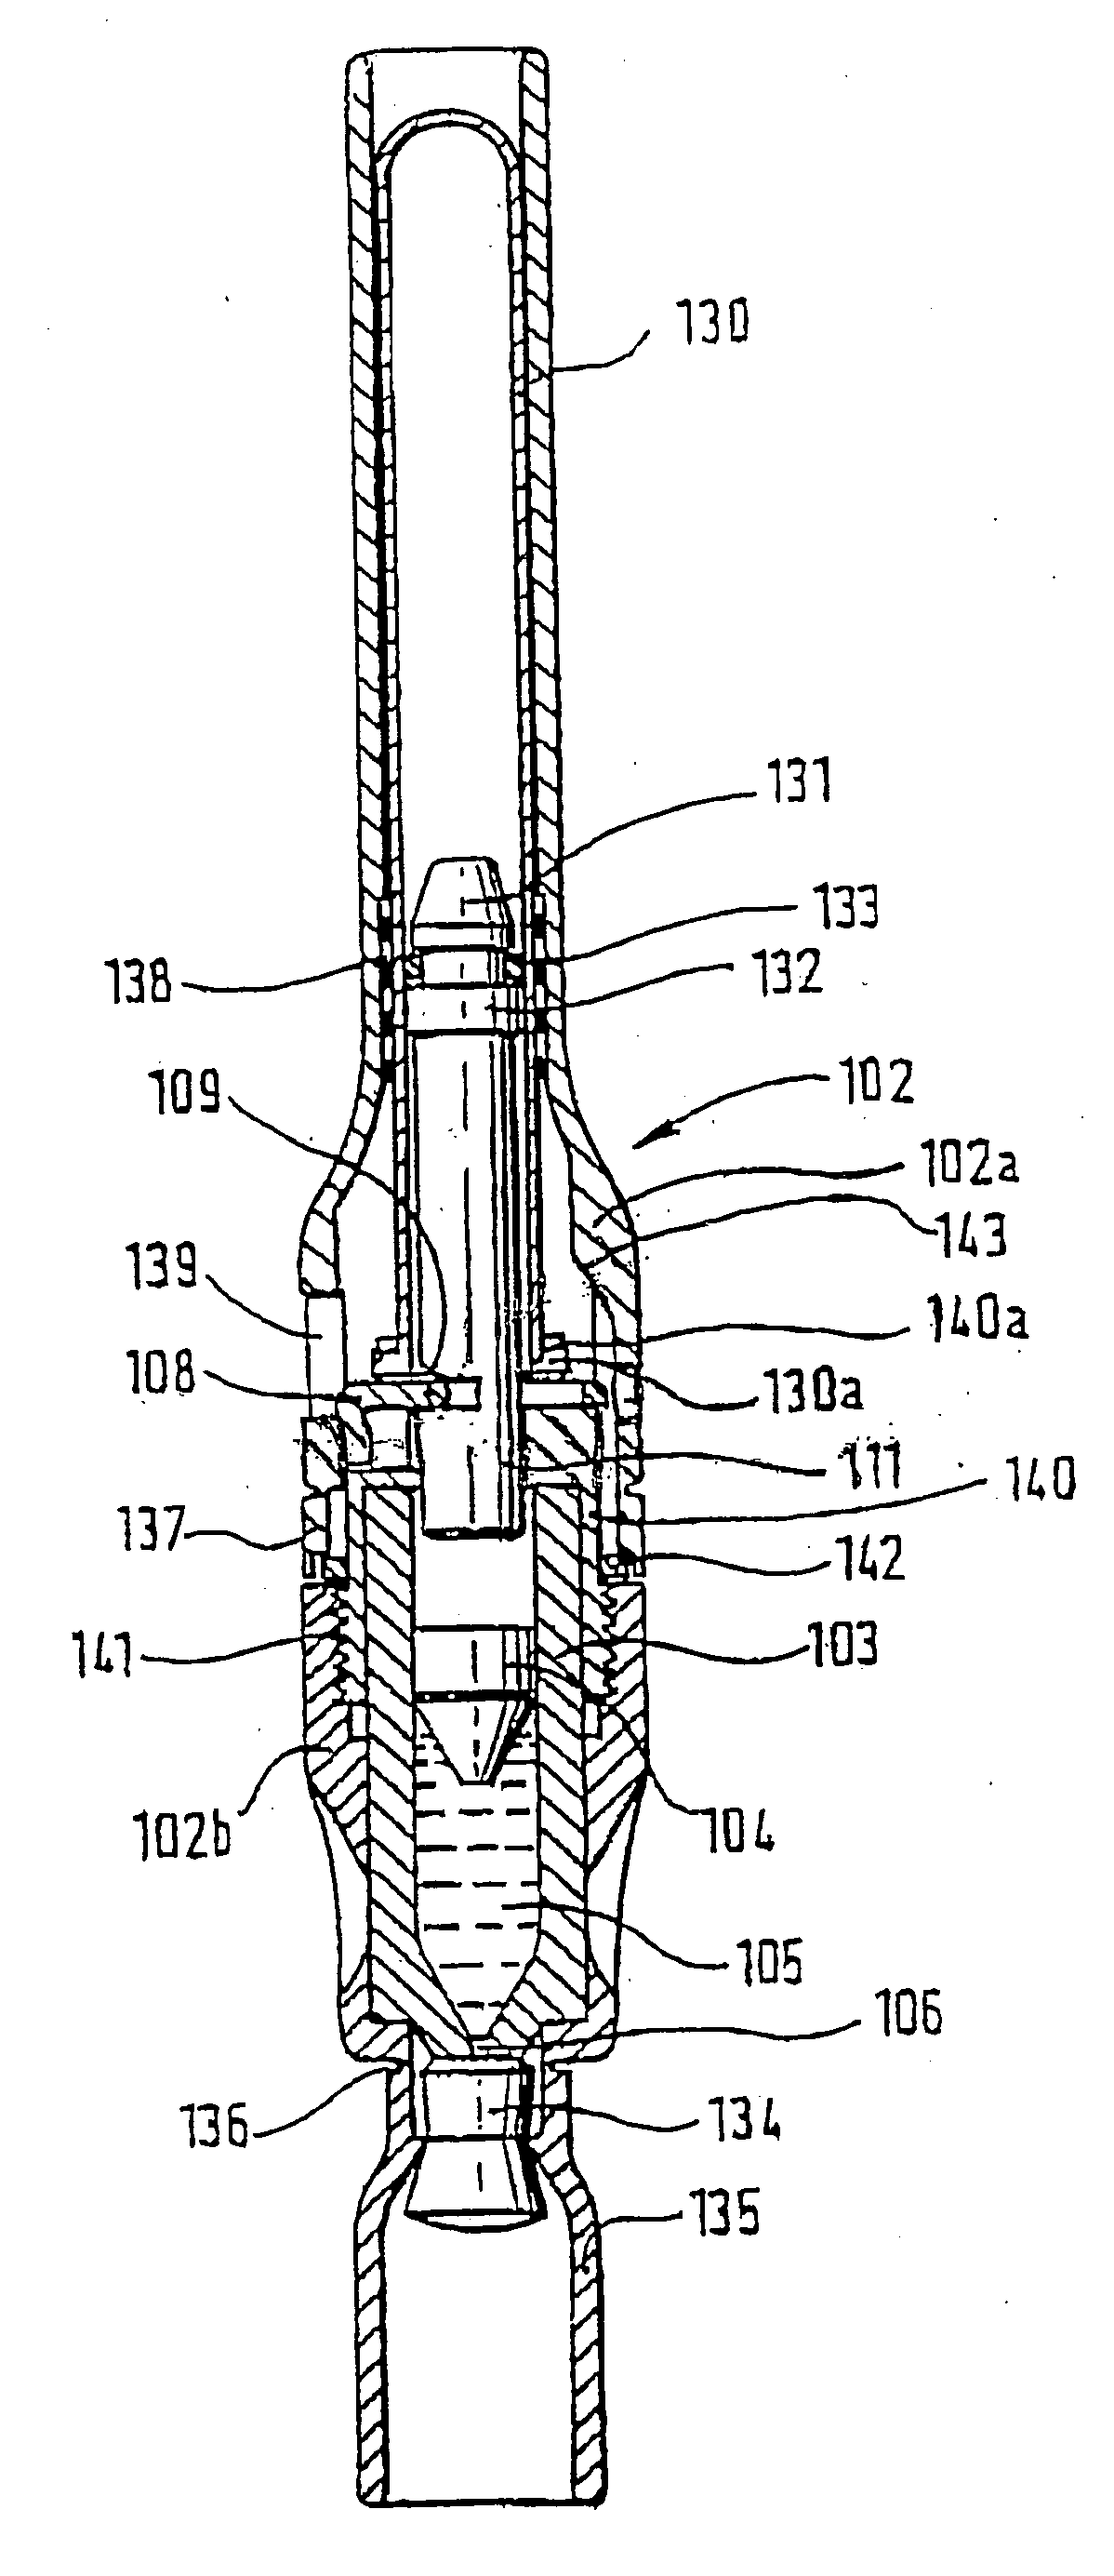 Needleless injector with shock absorbing means between ram and piston